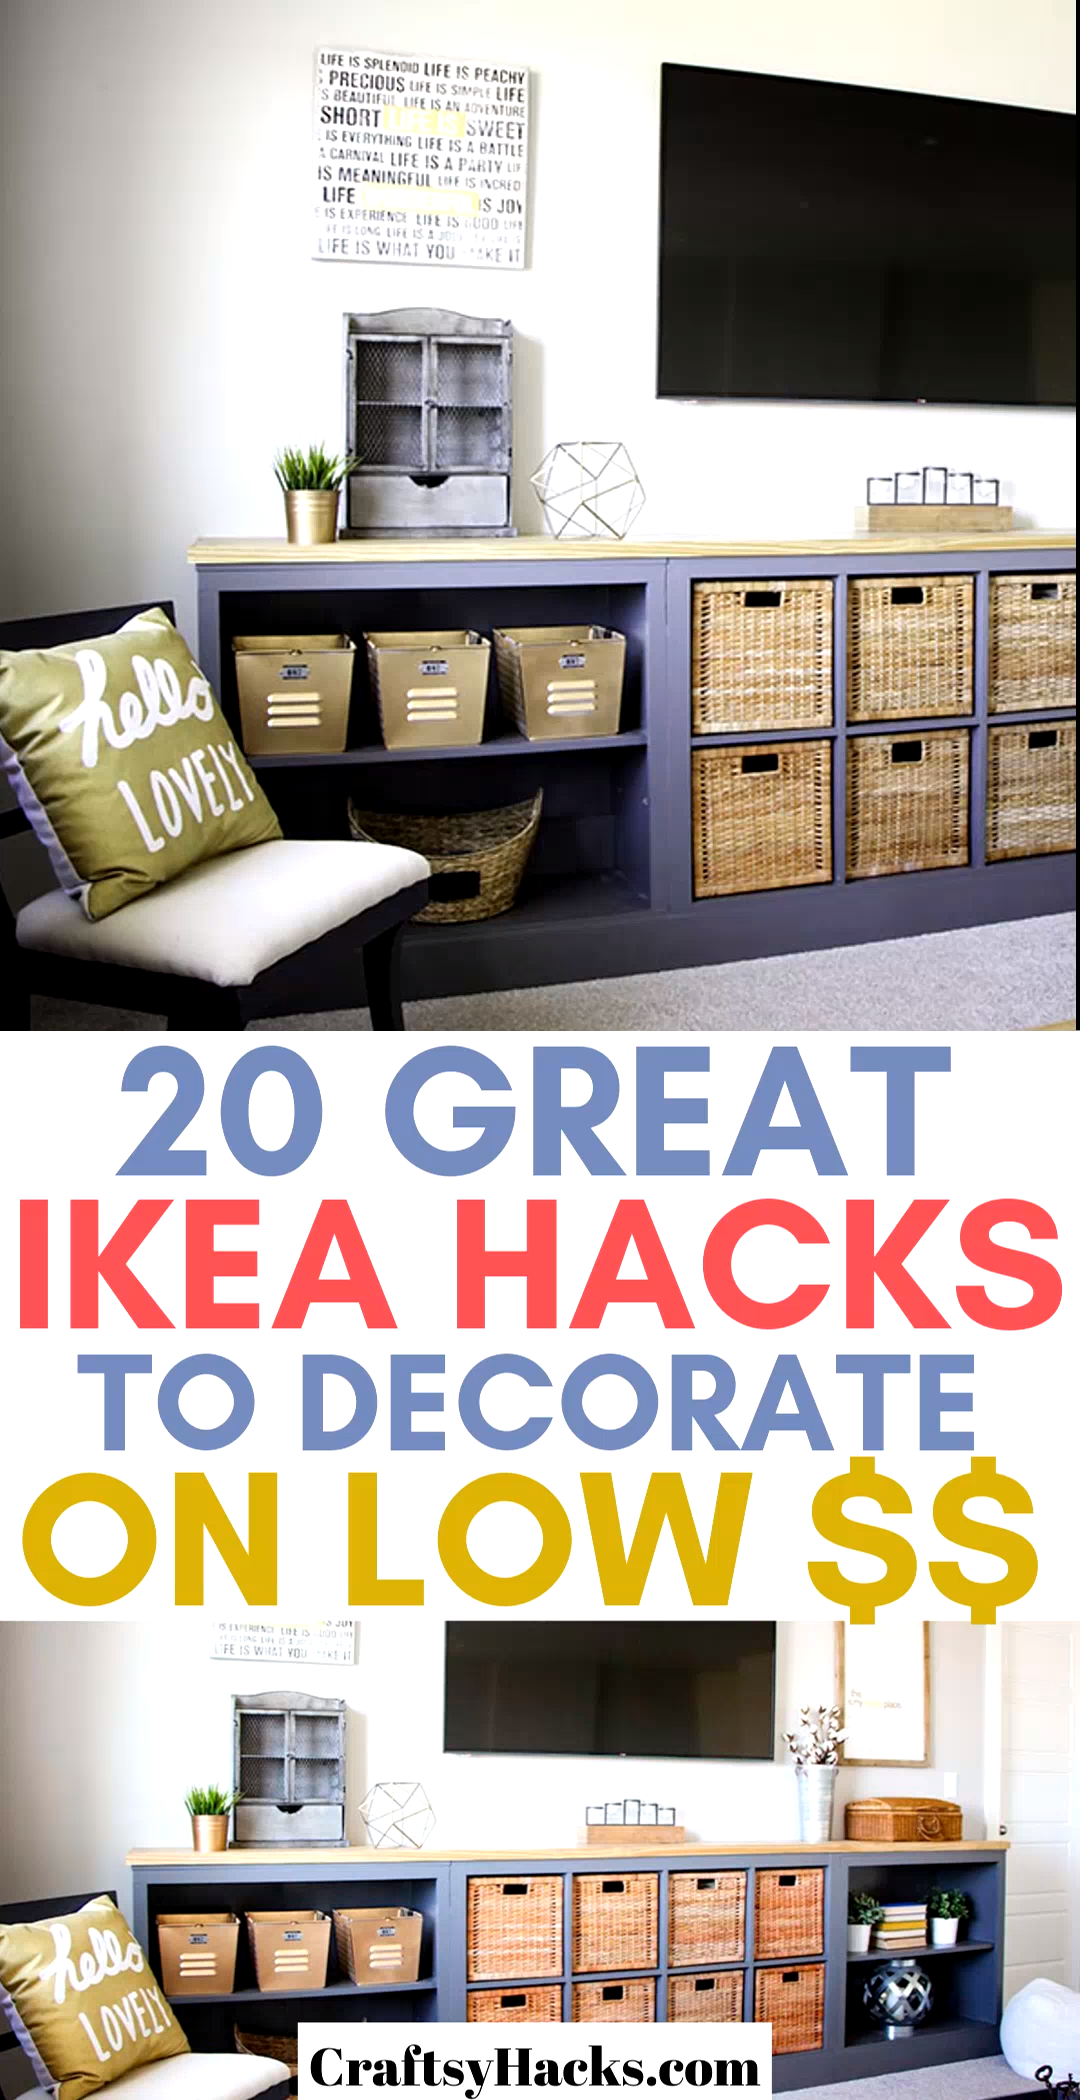 20 Great Ikea Hacks to Decorate on Low $$ -   18 home decor living room on a budget ideas